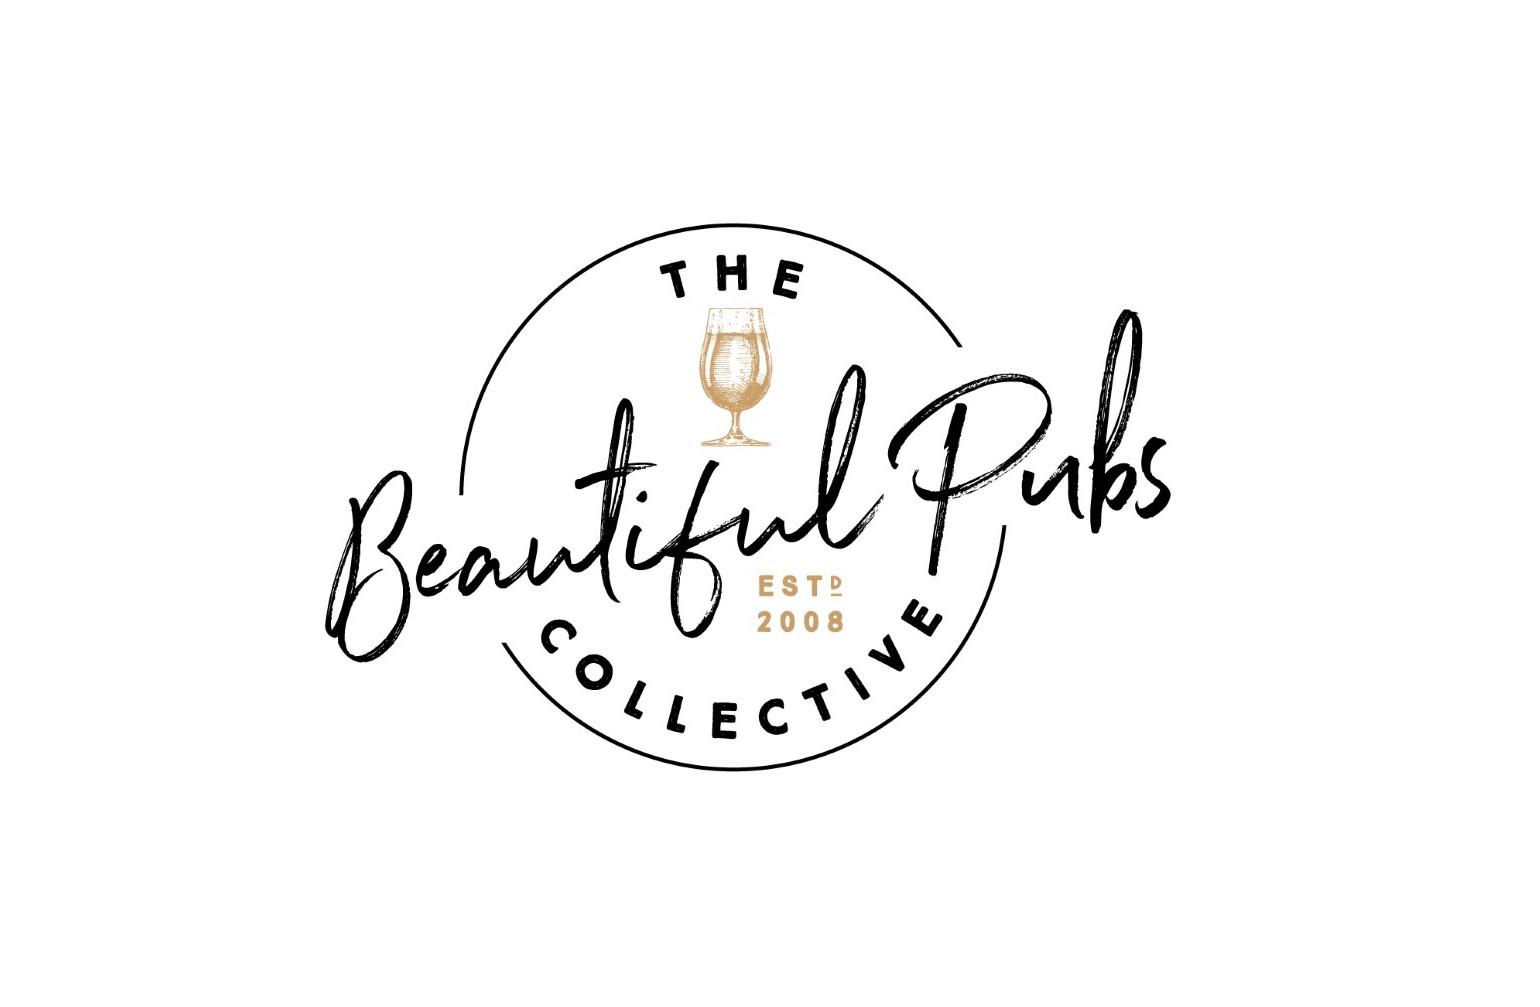 The Beautiful Pubs Collective